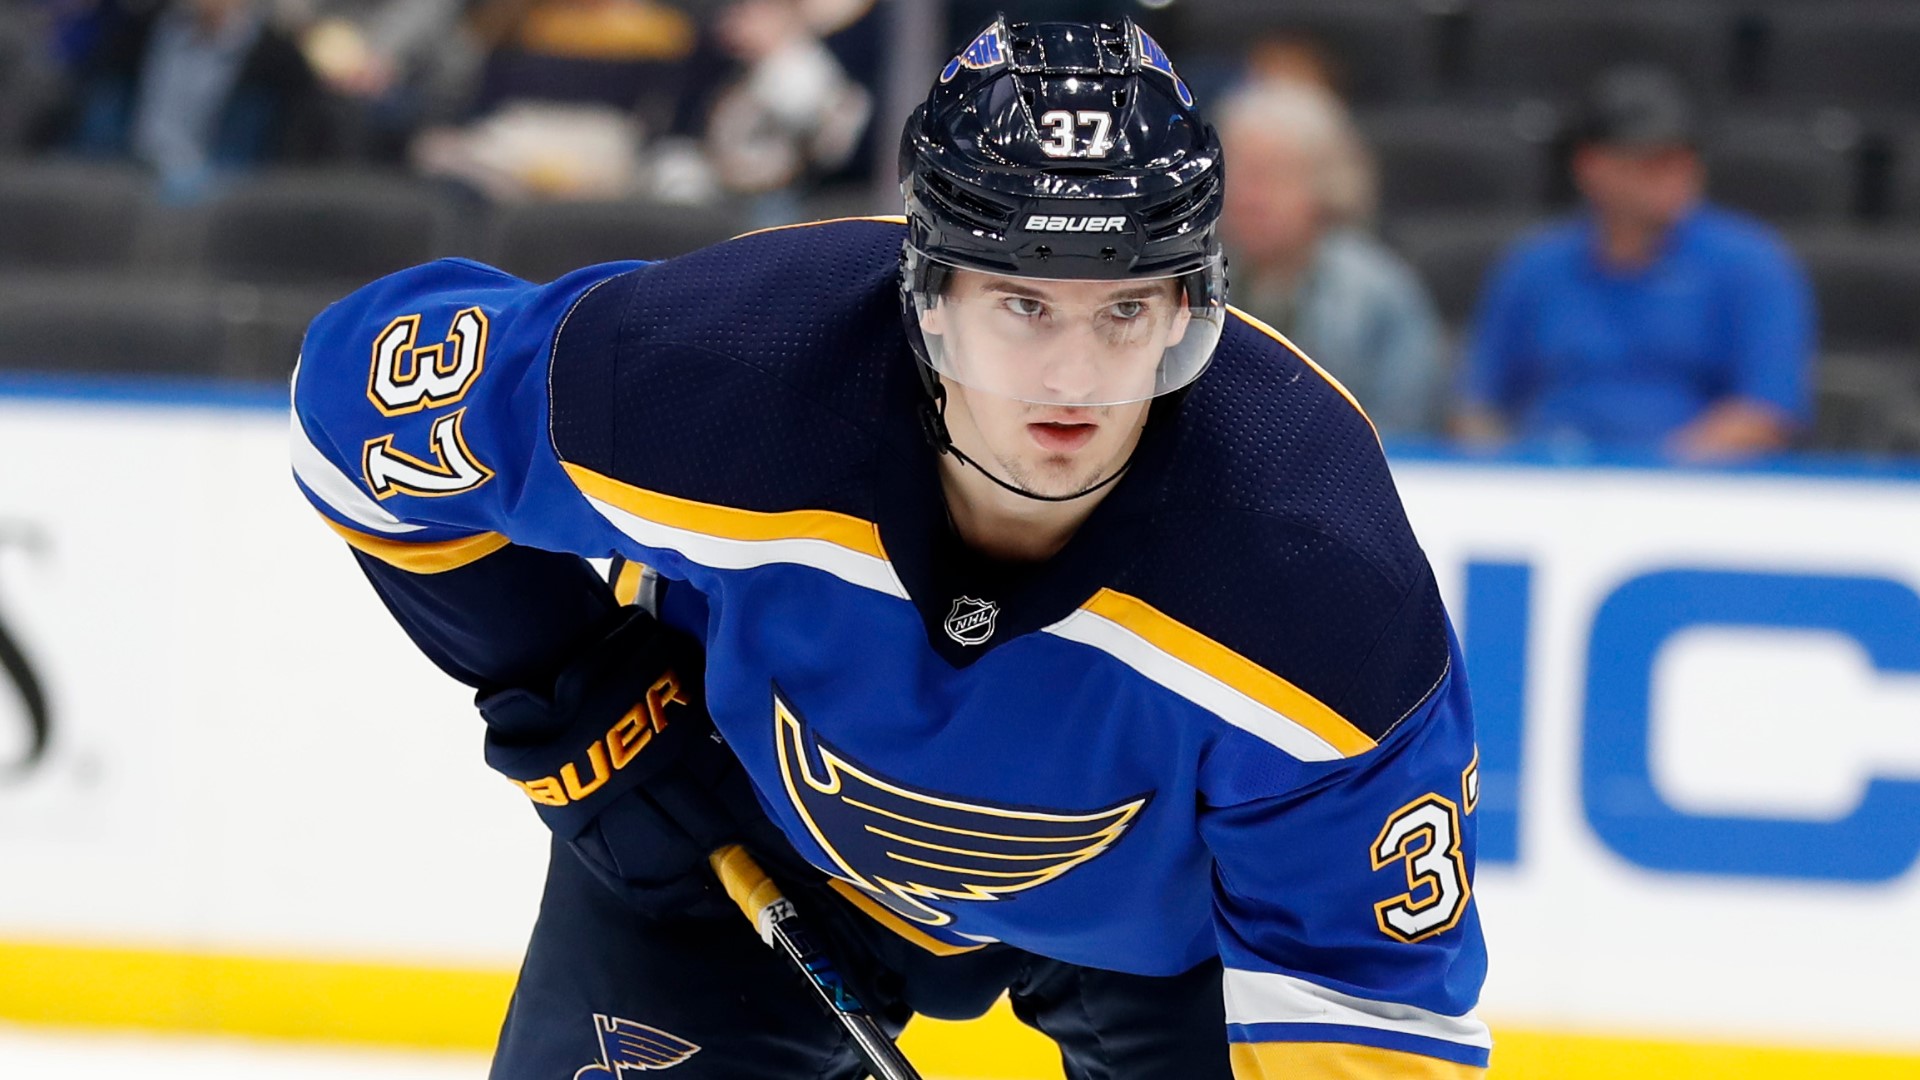 One of the Blues top prospects, Klim Kostin, speaks about his chance to make the Blues roster next season.